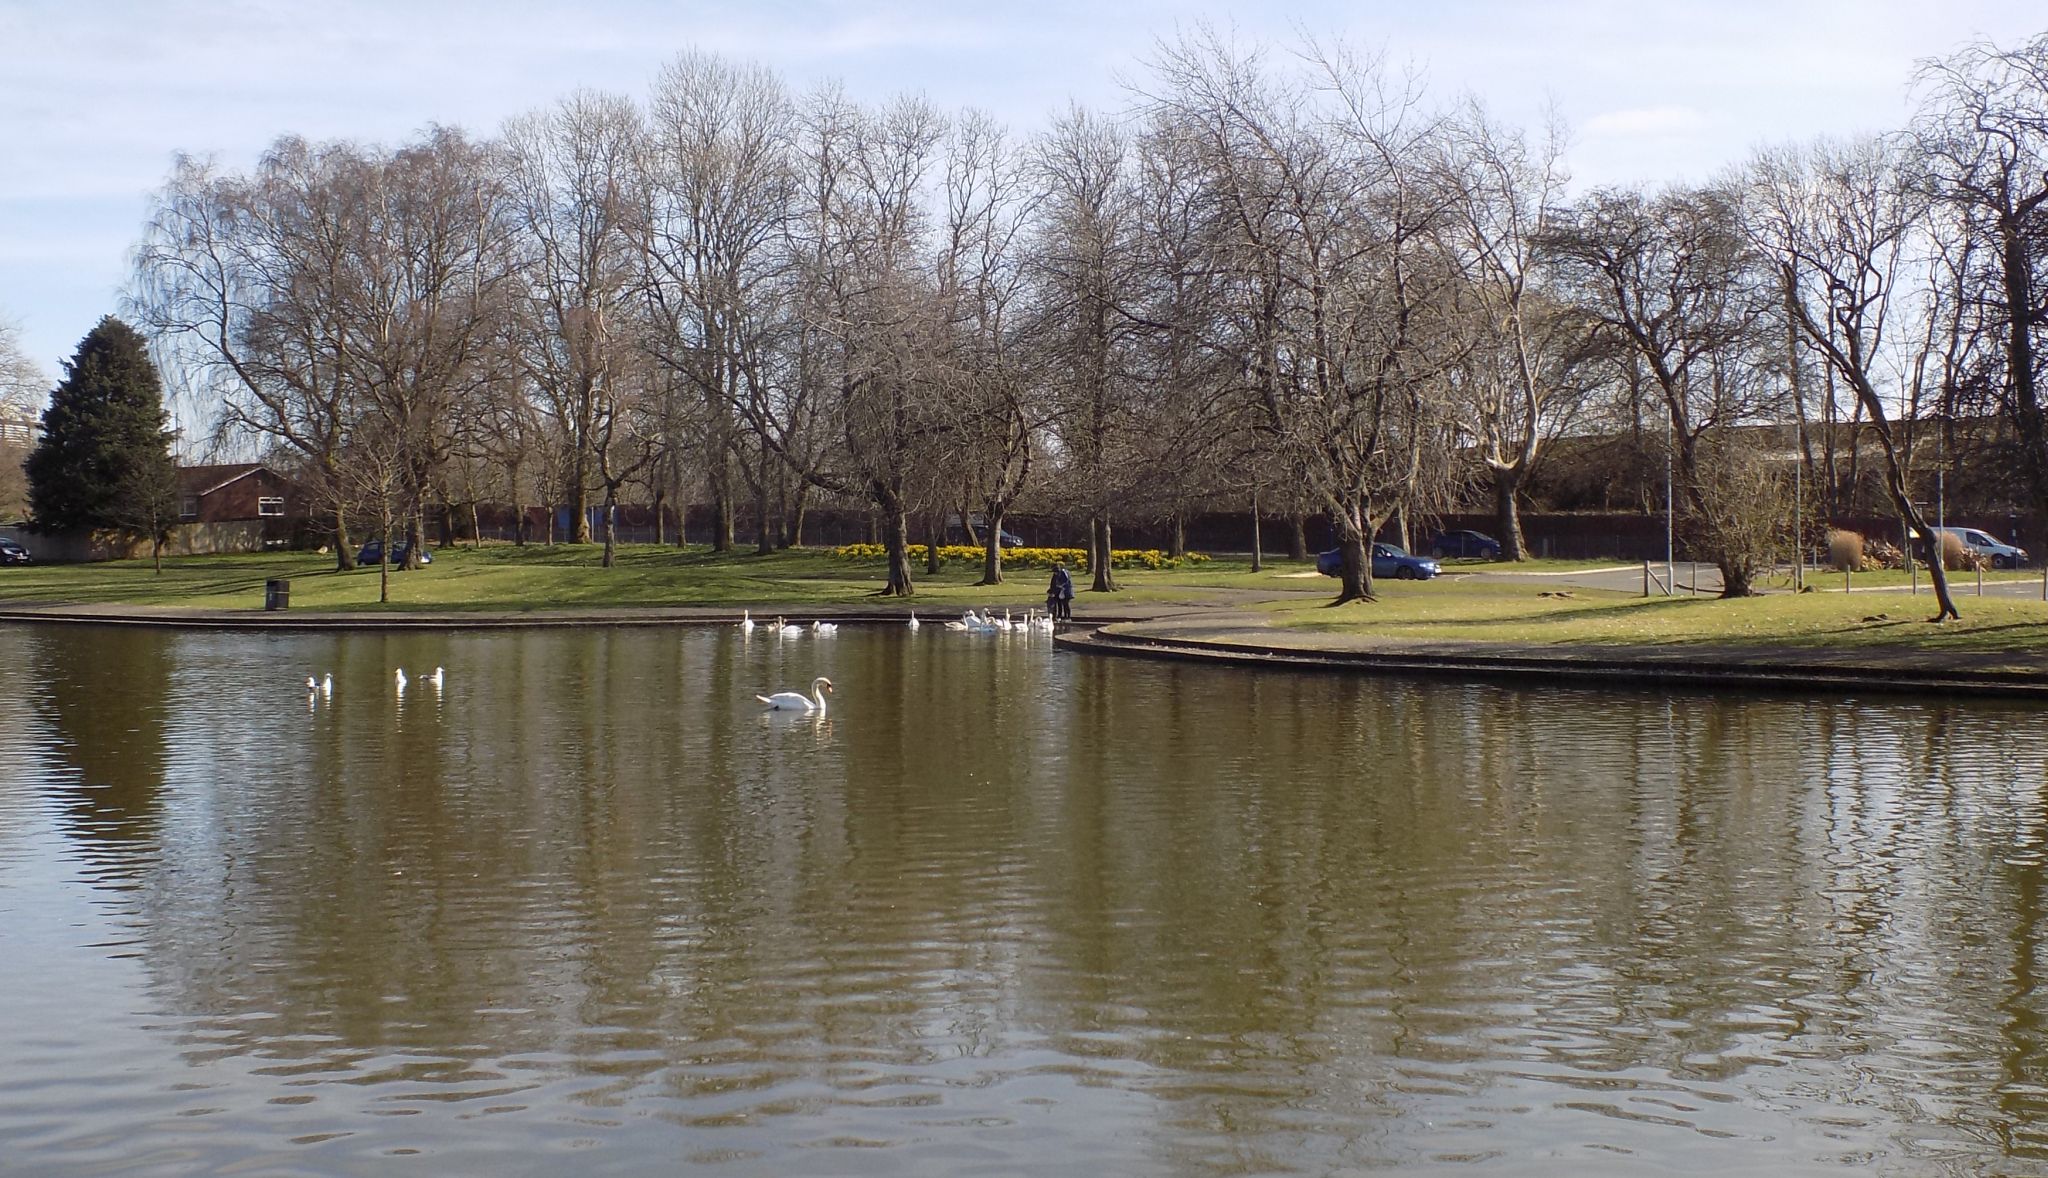 The boating pond in Richmond Park